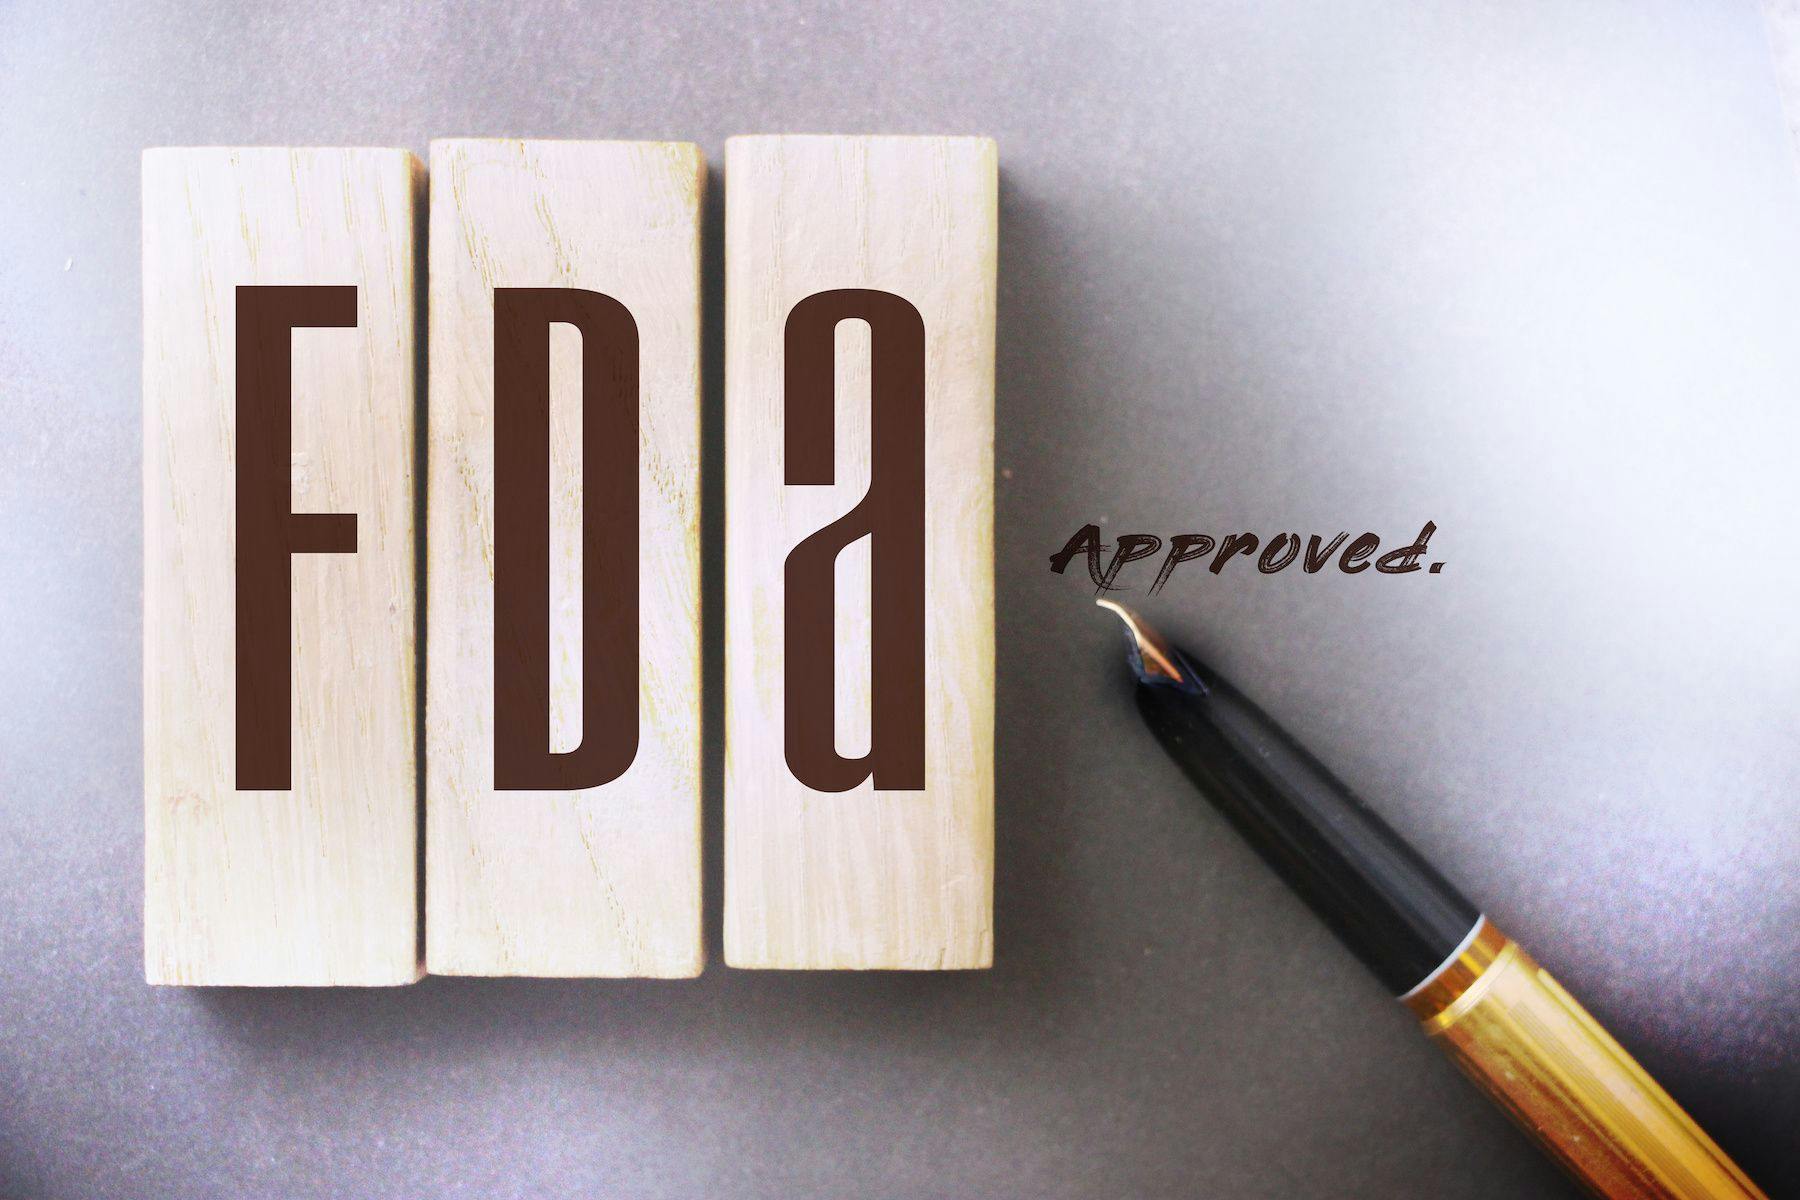 Drugs that receive an accelerated approval still need to confirm their benefit through mandatory post approval trials in order to gain full, traditional approval. | image credit: Ana Baraulia / stock.adobe.com